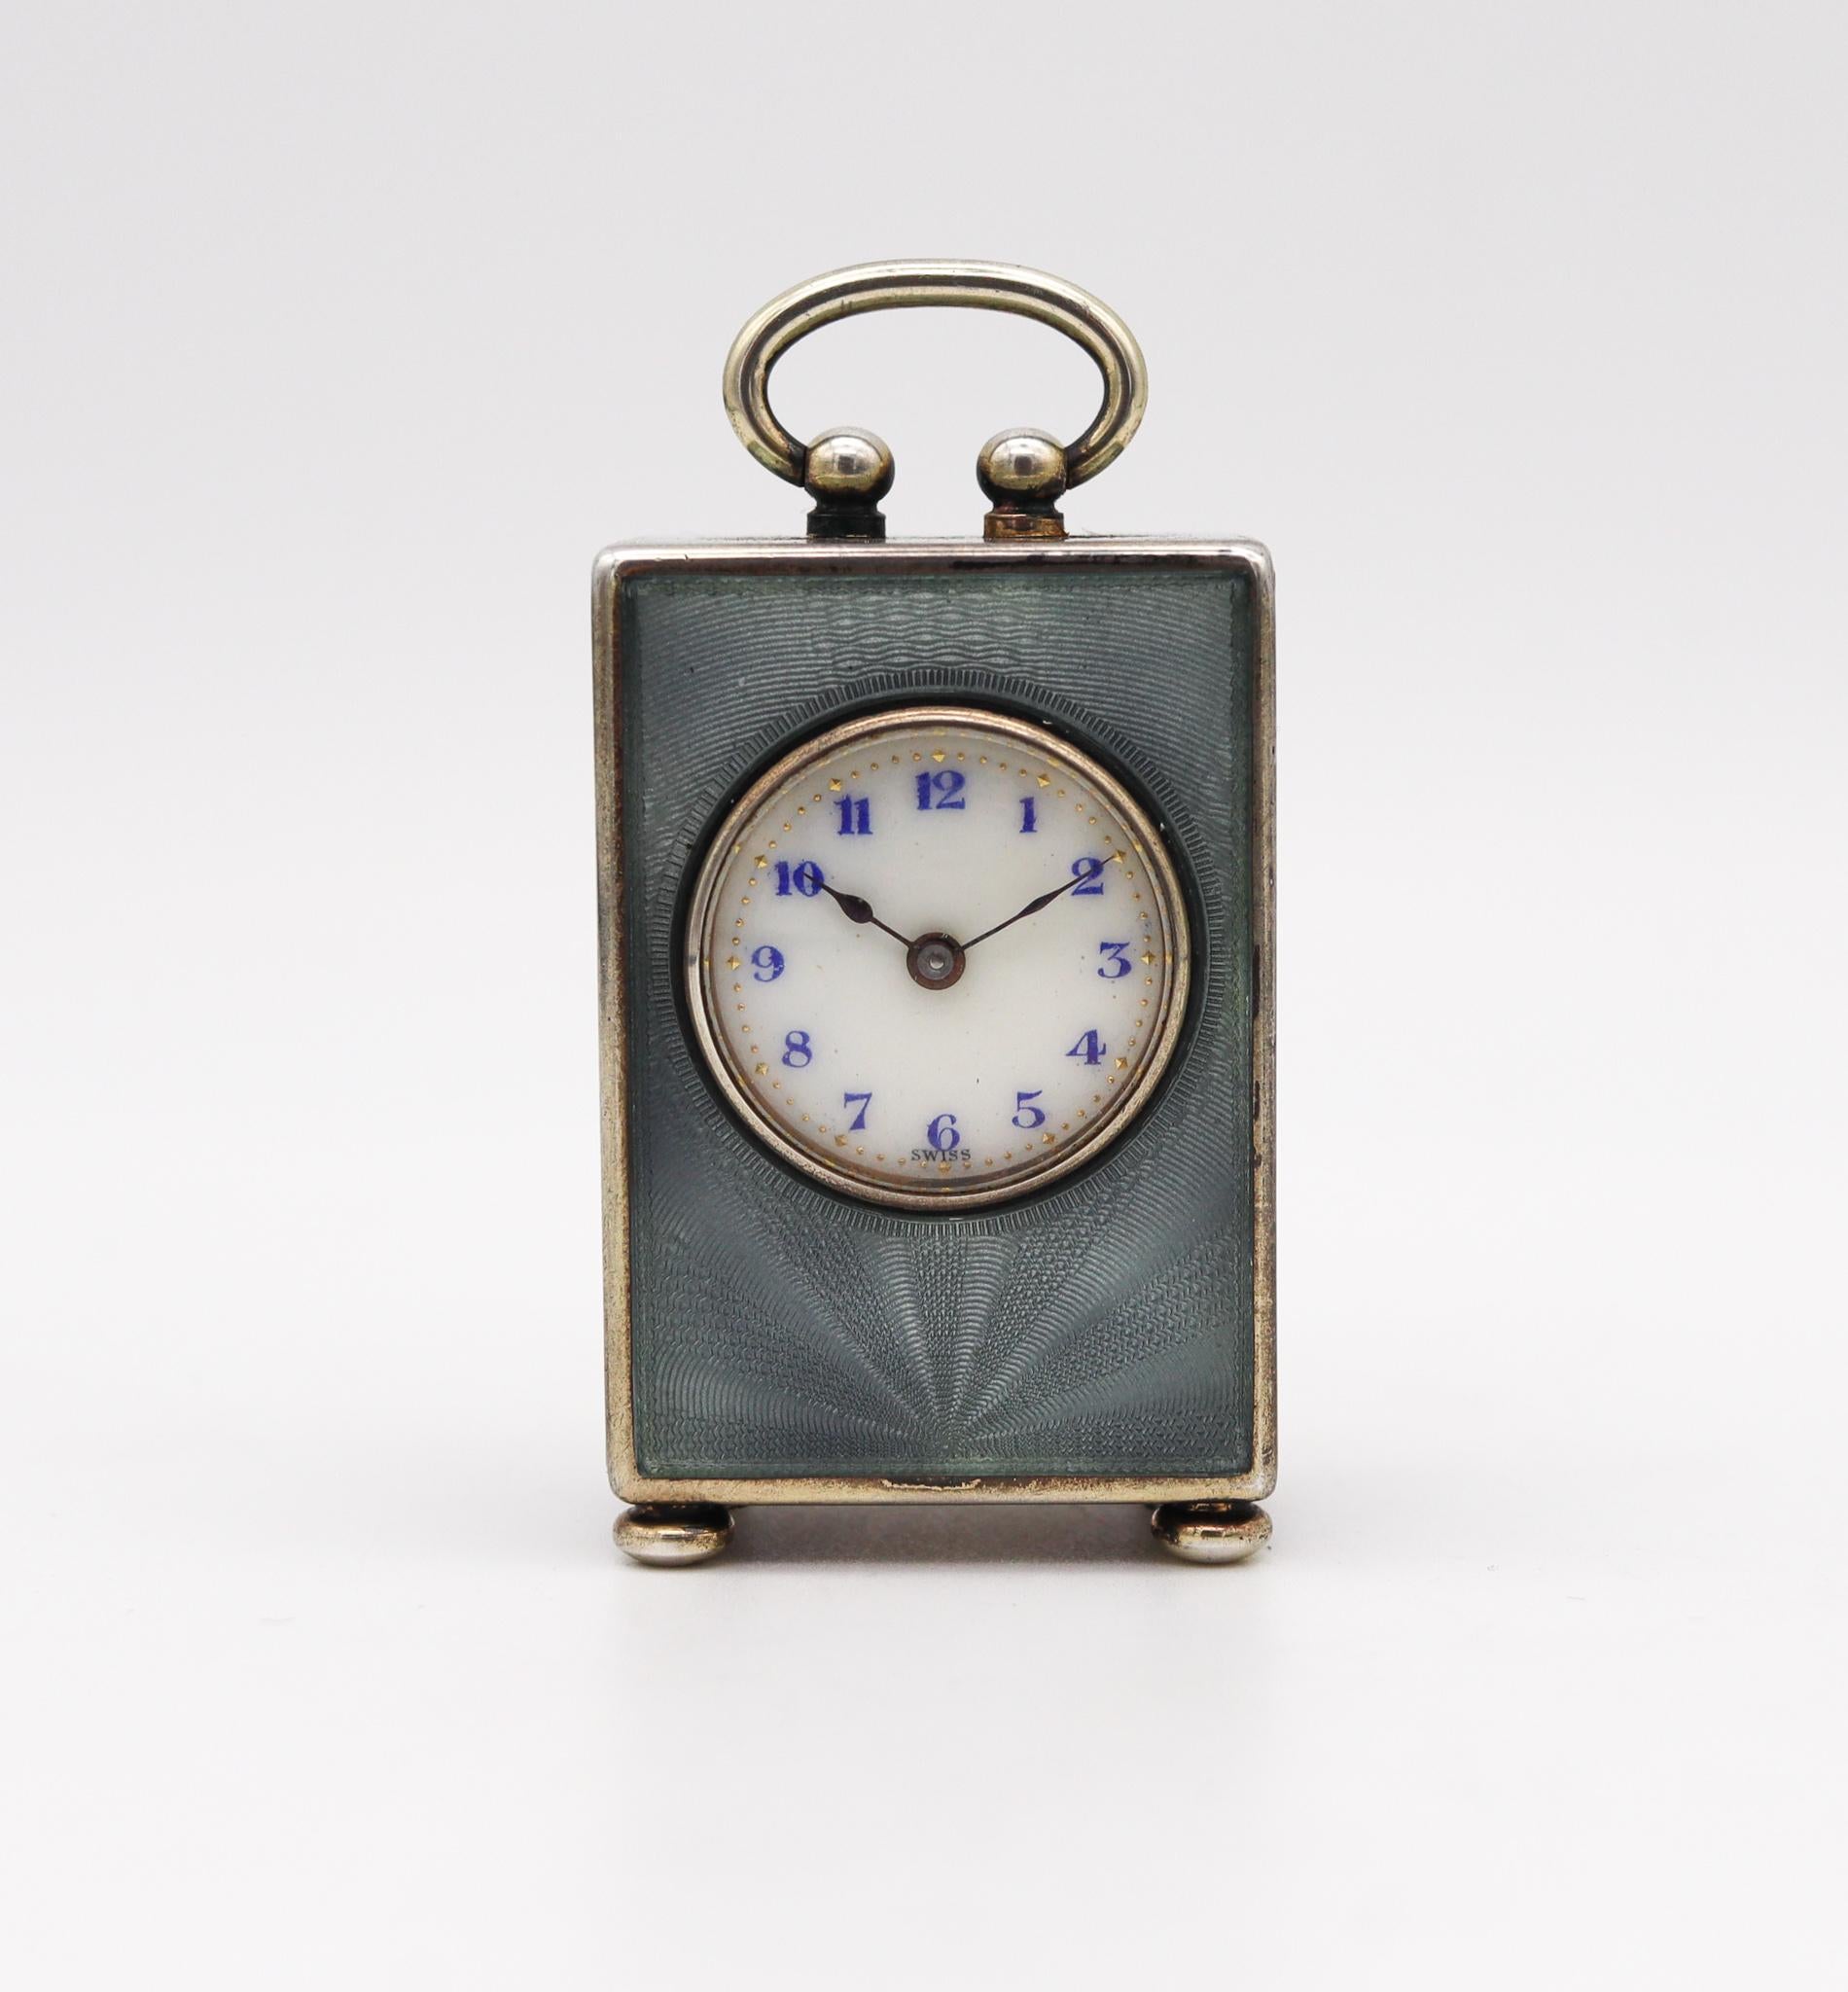 An Edwardian miniature travel clock designed by Valmé.

Stunning and rare miniature travel-carriage clock, made in Geneva Switzerland by the Valmé Swiss Co. and the Concord Watch Co. This little antique clock is exceptional, created during the